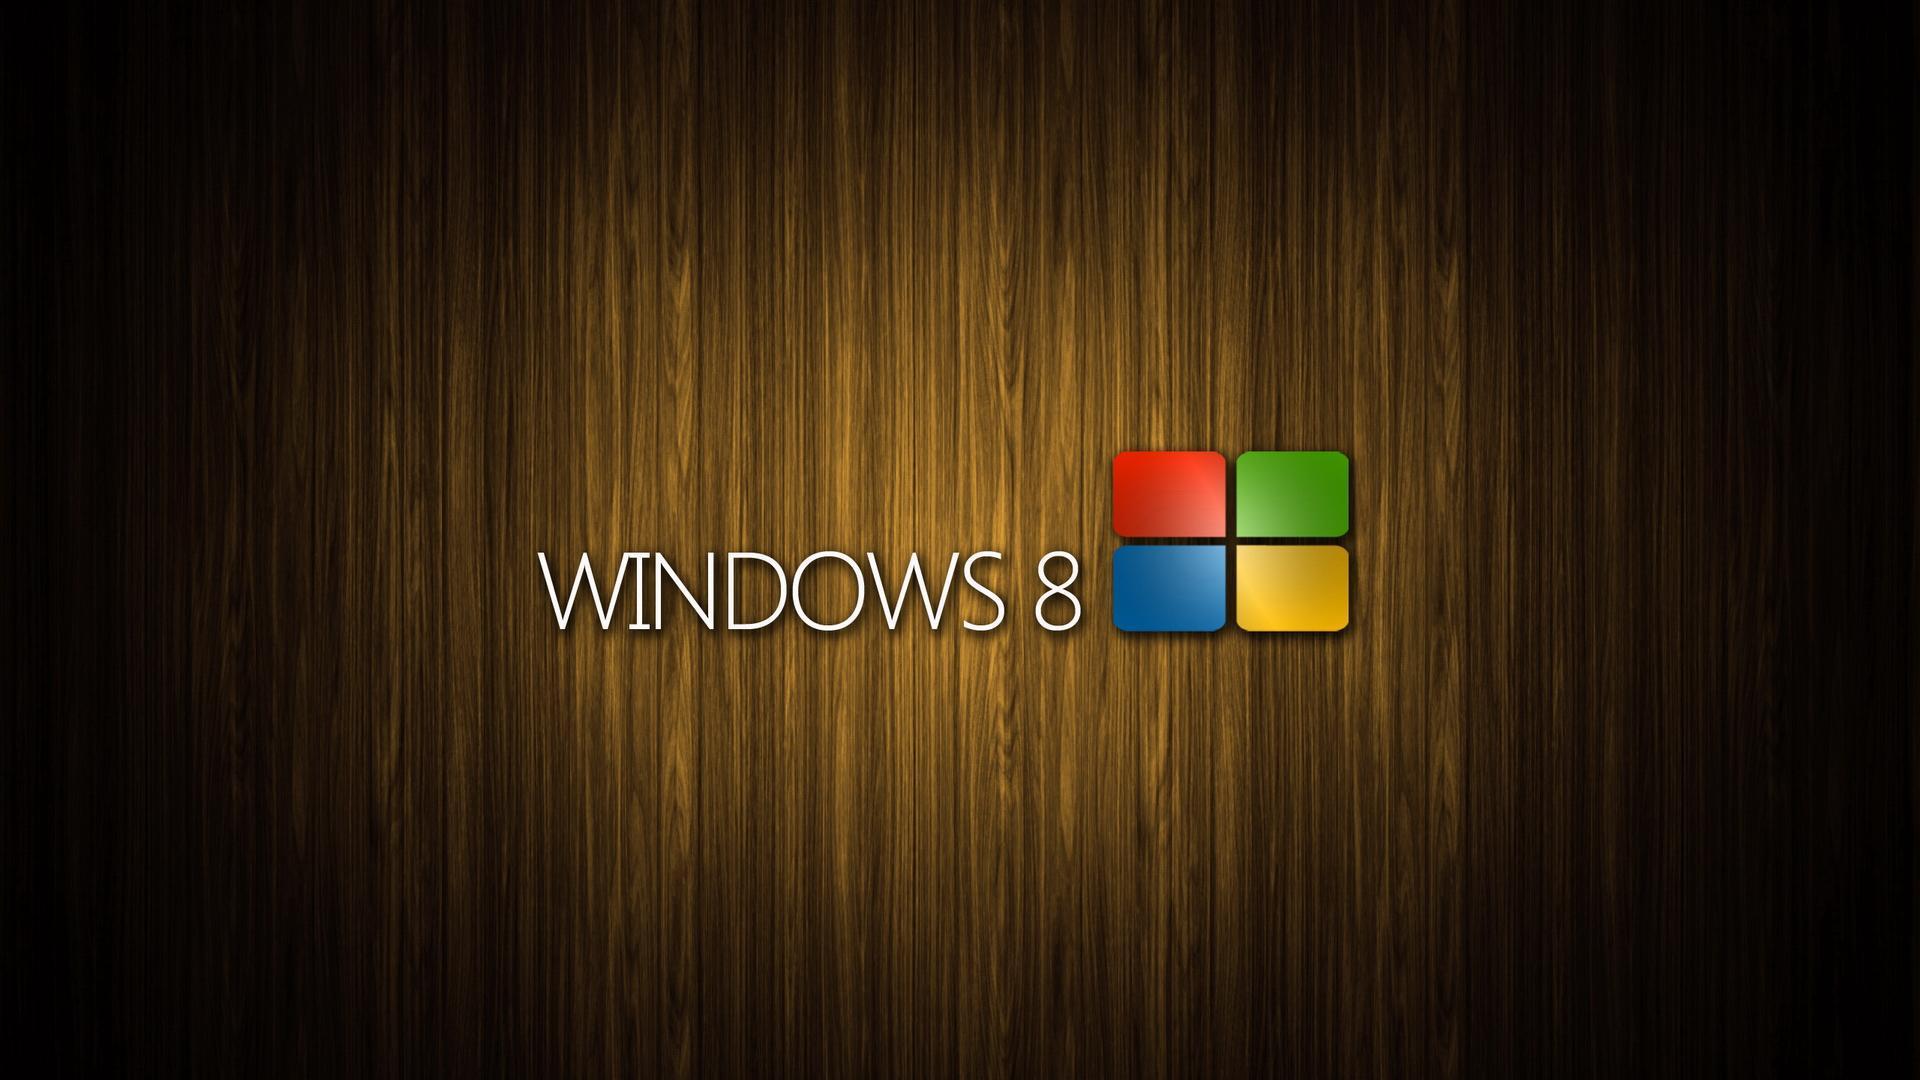 Wallpapers For > Windows 8 Mobile Wallpapers